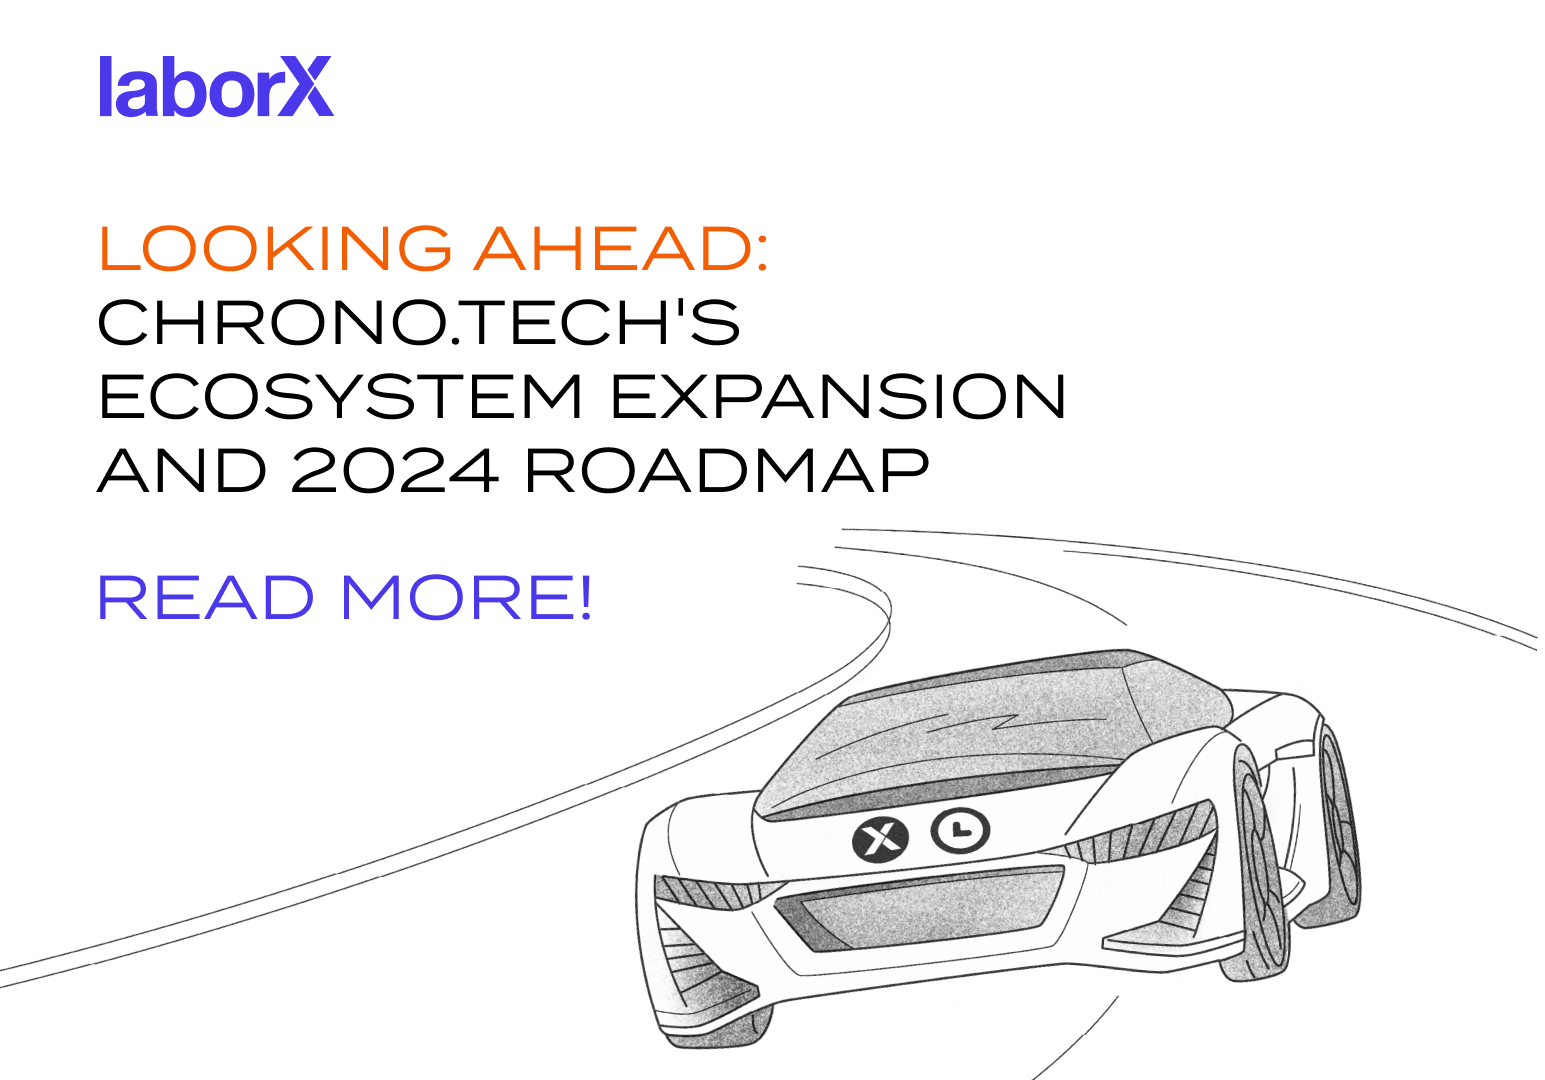 Looking Ahead: Chrono.tech's Ecosystem Expansion and 2024 Roadmap